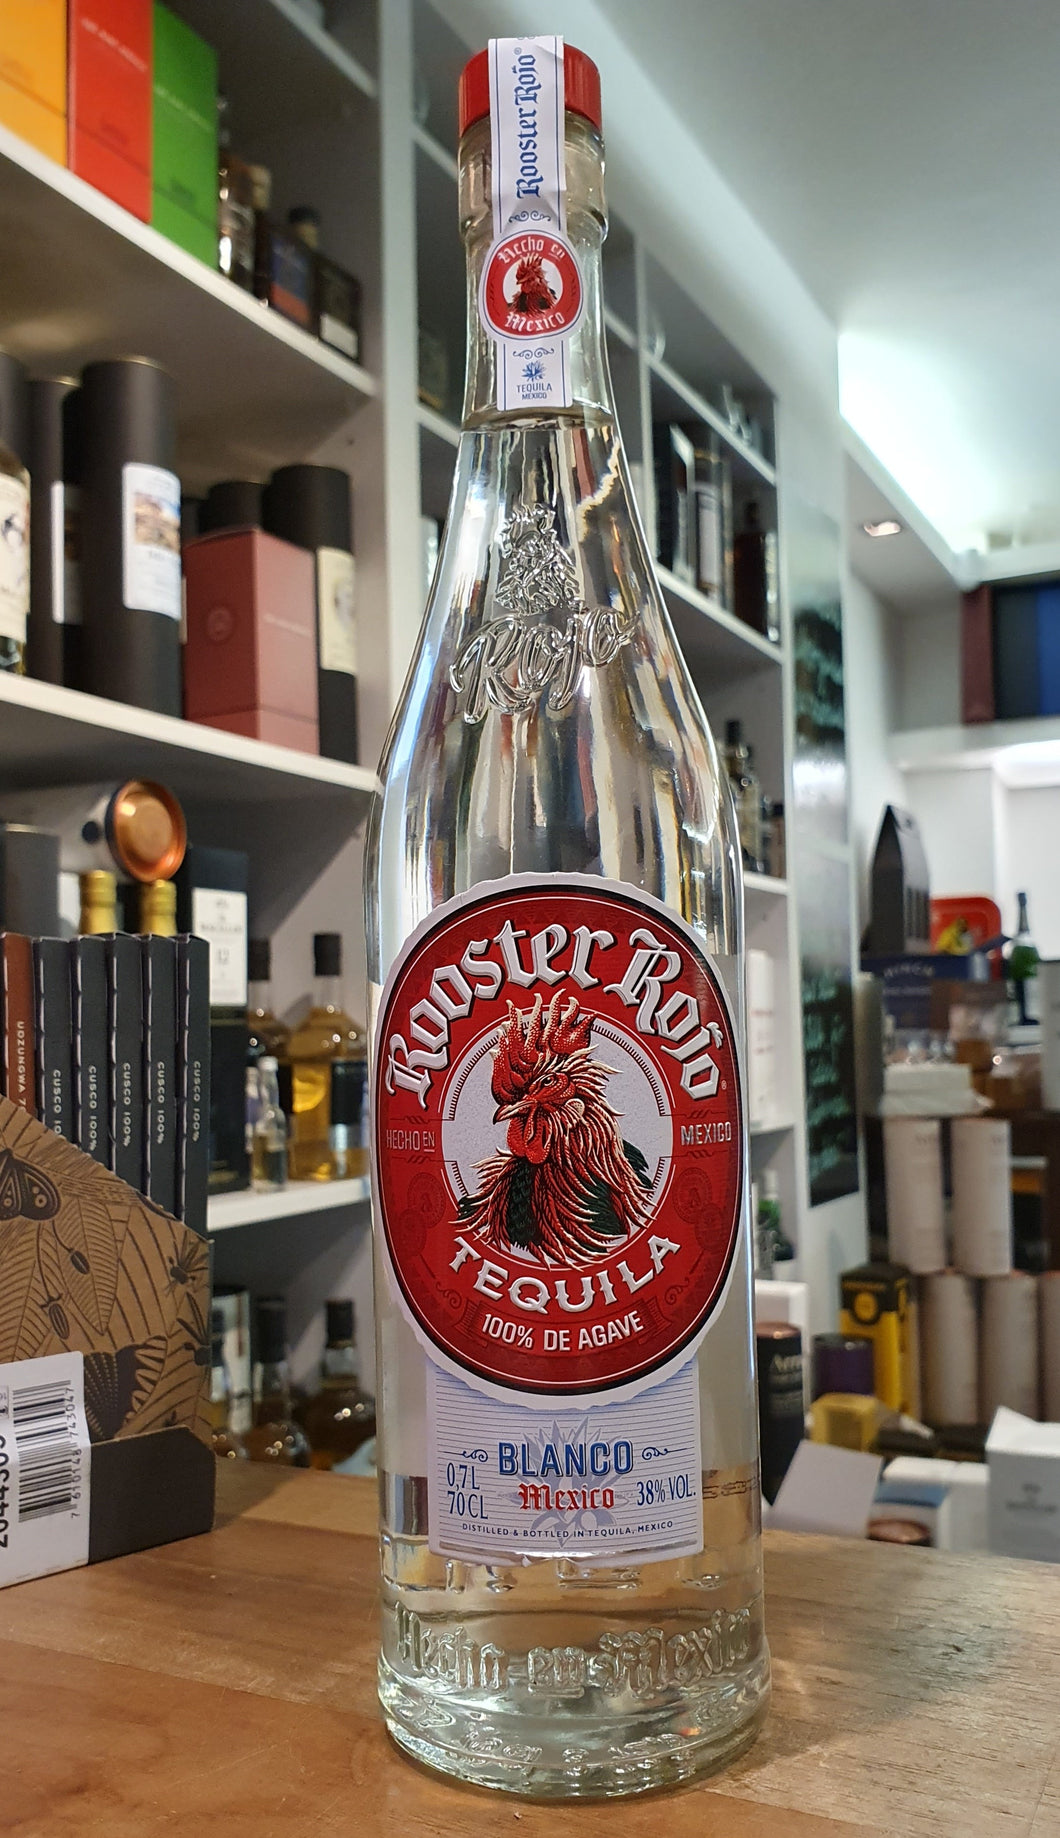 Rooster Rojo blanco Tequila 0,7l 38% vol.